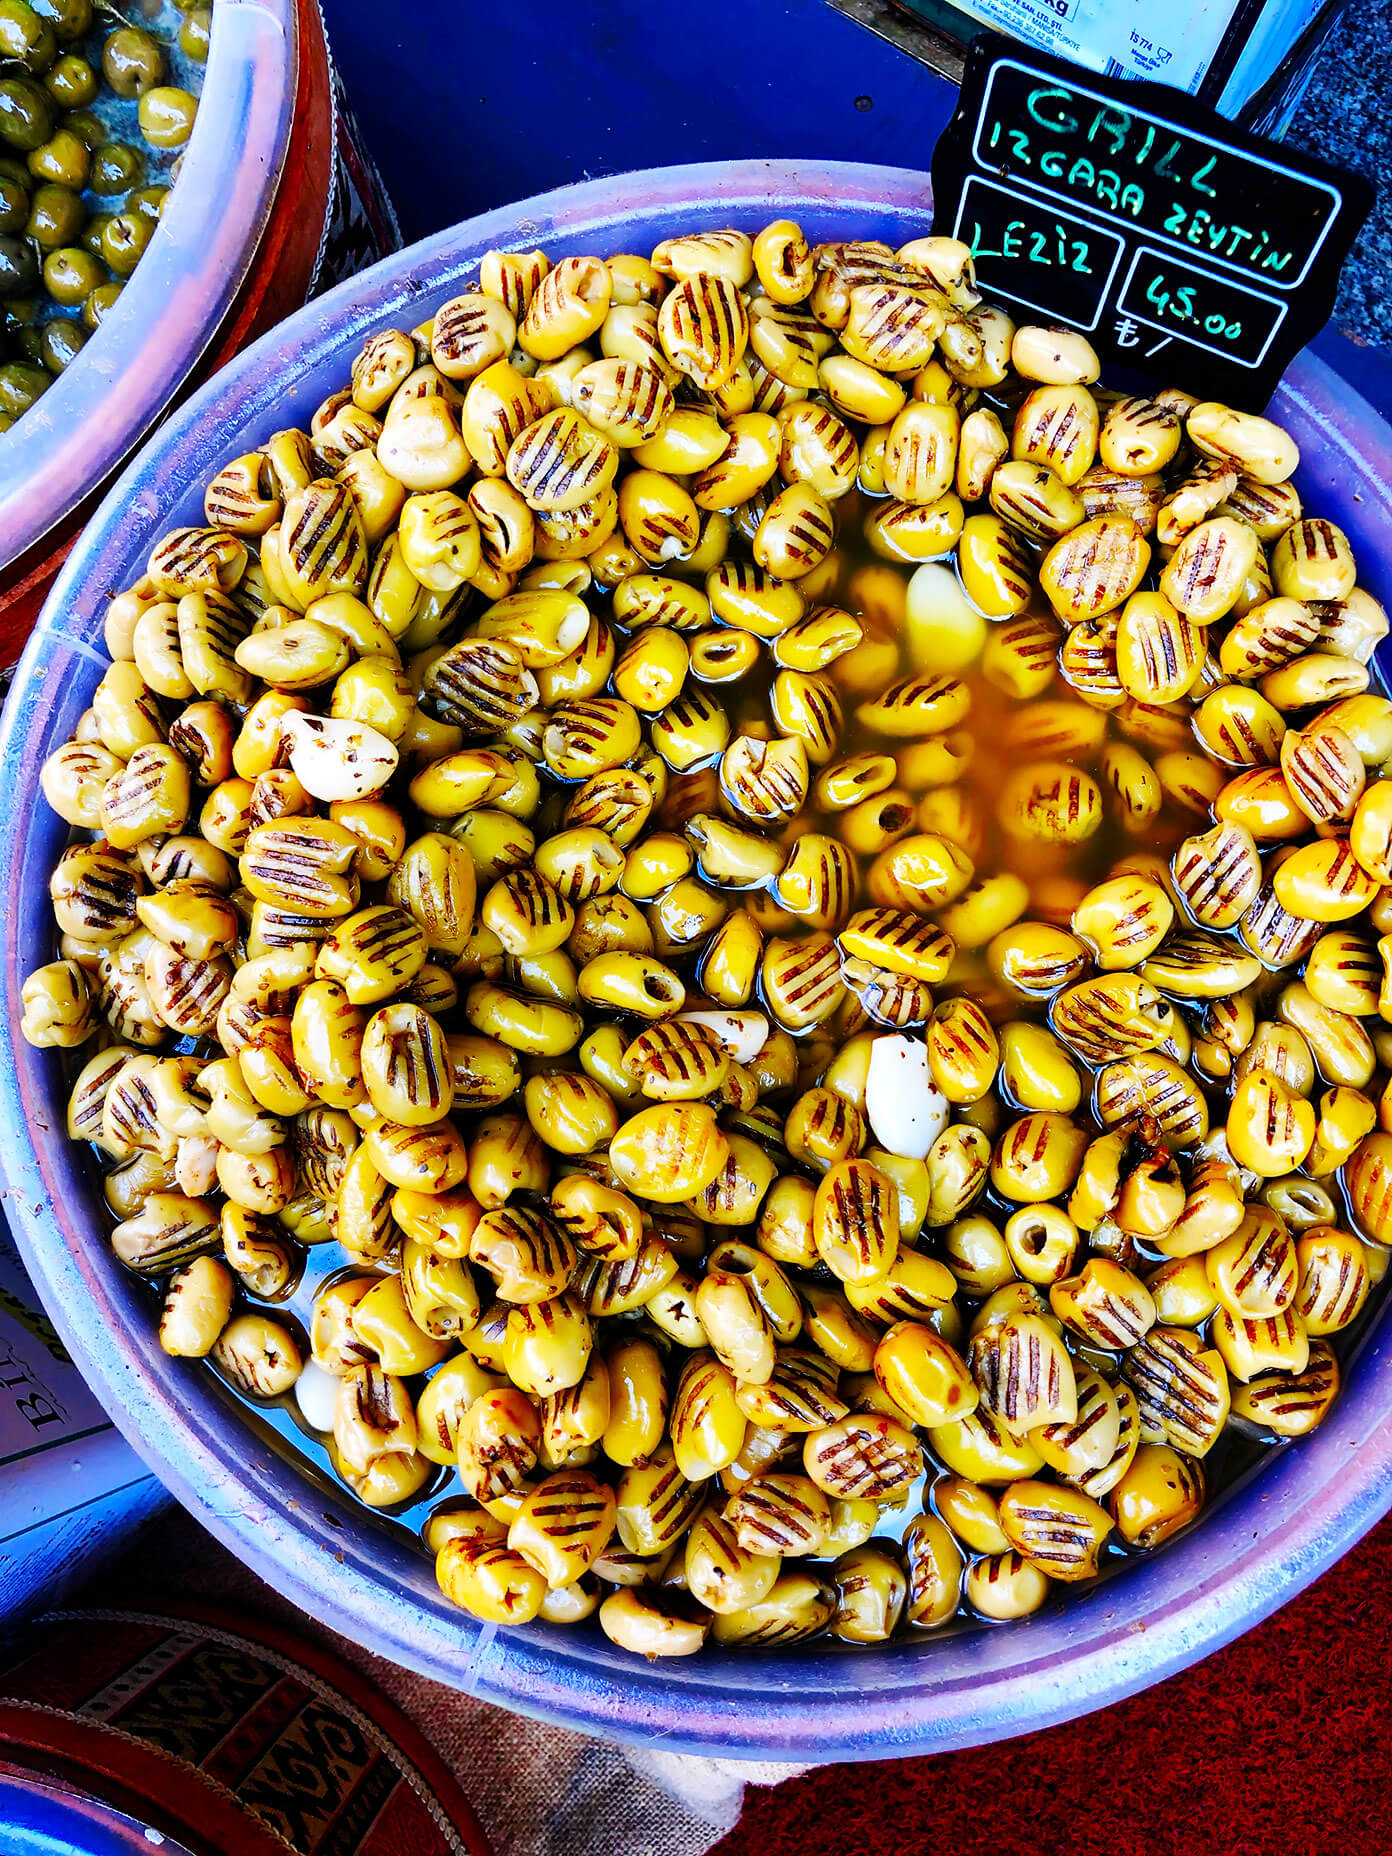 Grilled olives in Istanbul spice market